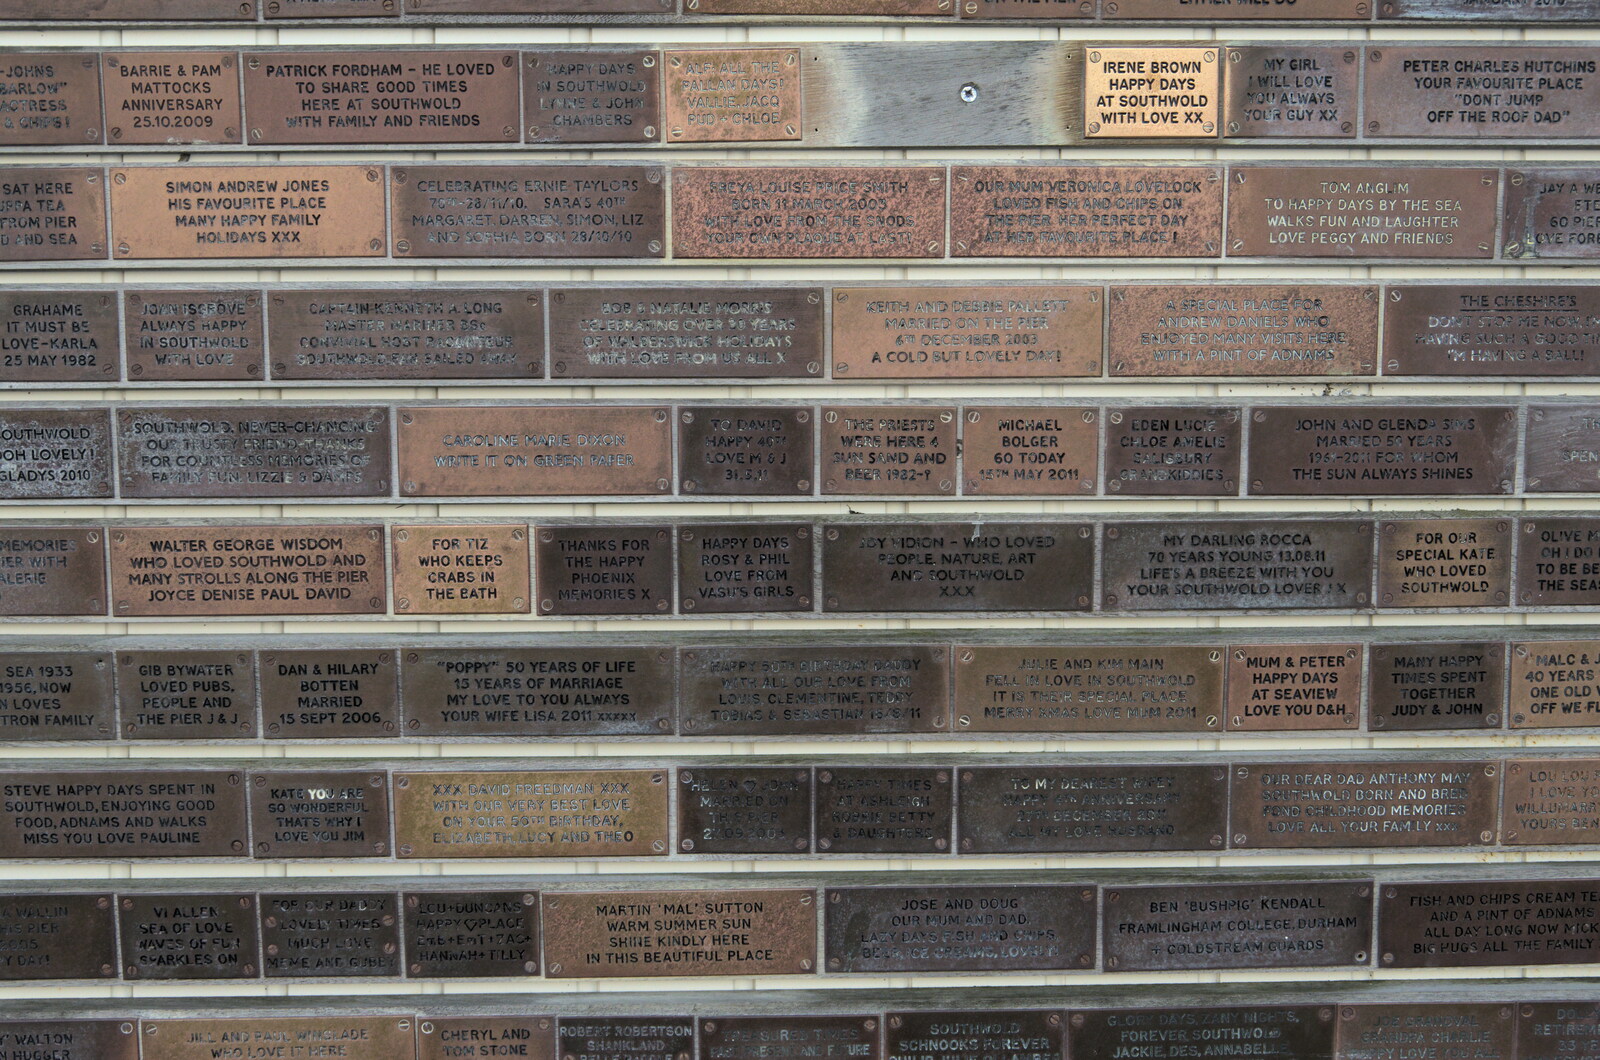 Some of the overflow dedication plaques from A Return to the Beach, Southwold, Suffolk - 20th December 2020